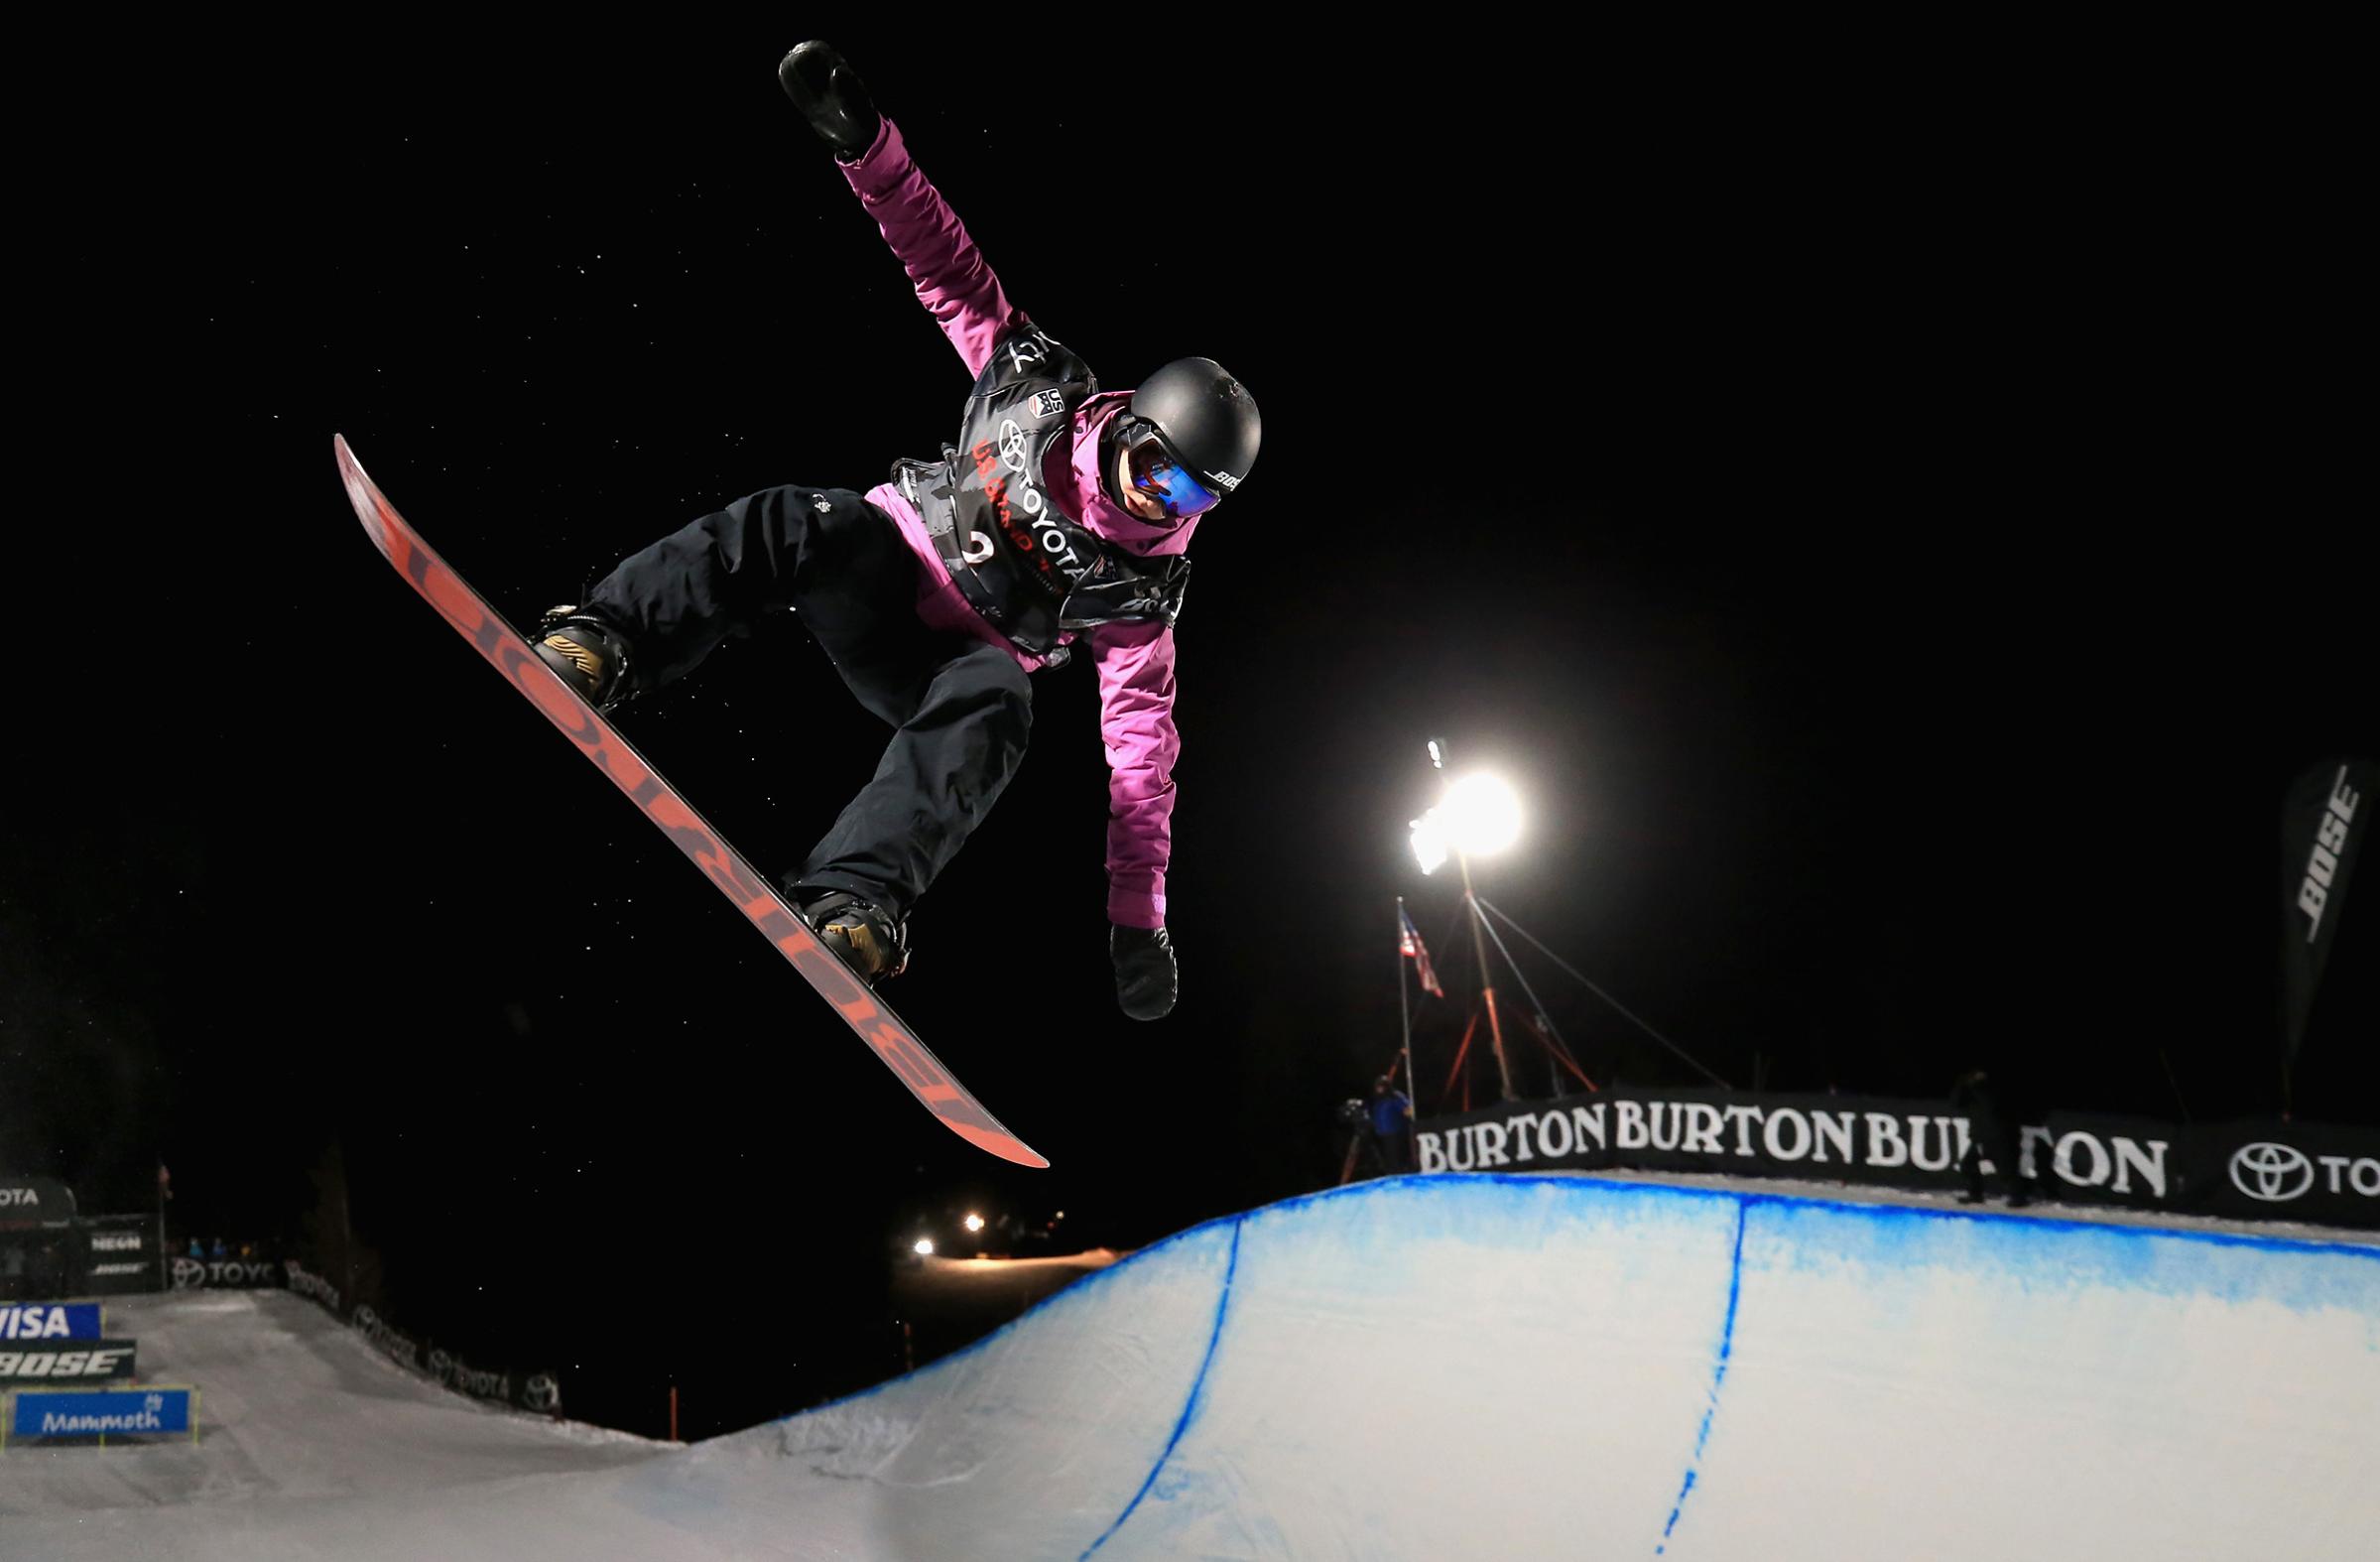 Kelly Clark competes in the final round of the Ladies' Snowboard Halfpipe during the Toyota U.S. Grand Prix in Mammoth, Calif., on Jan. 20, 2018.